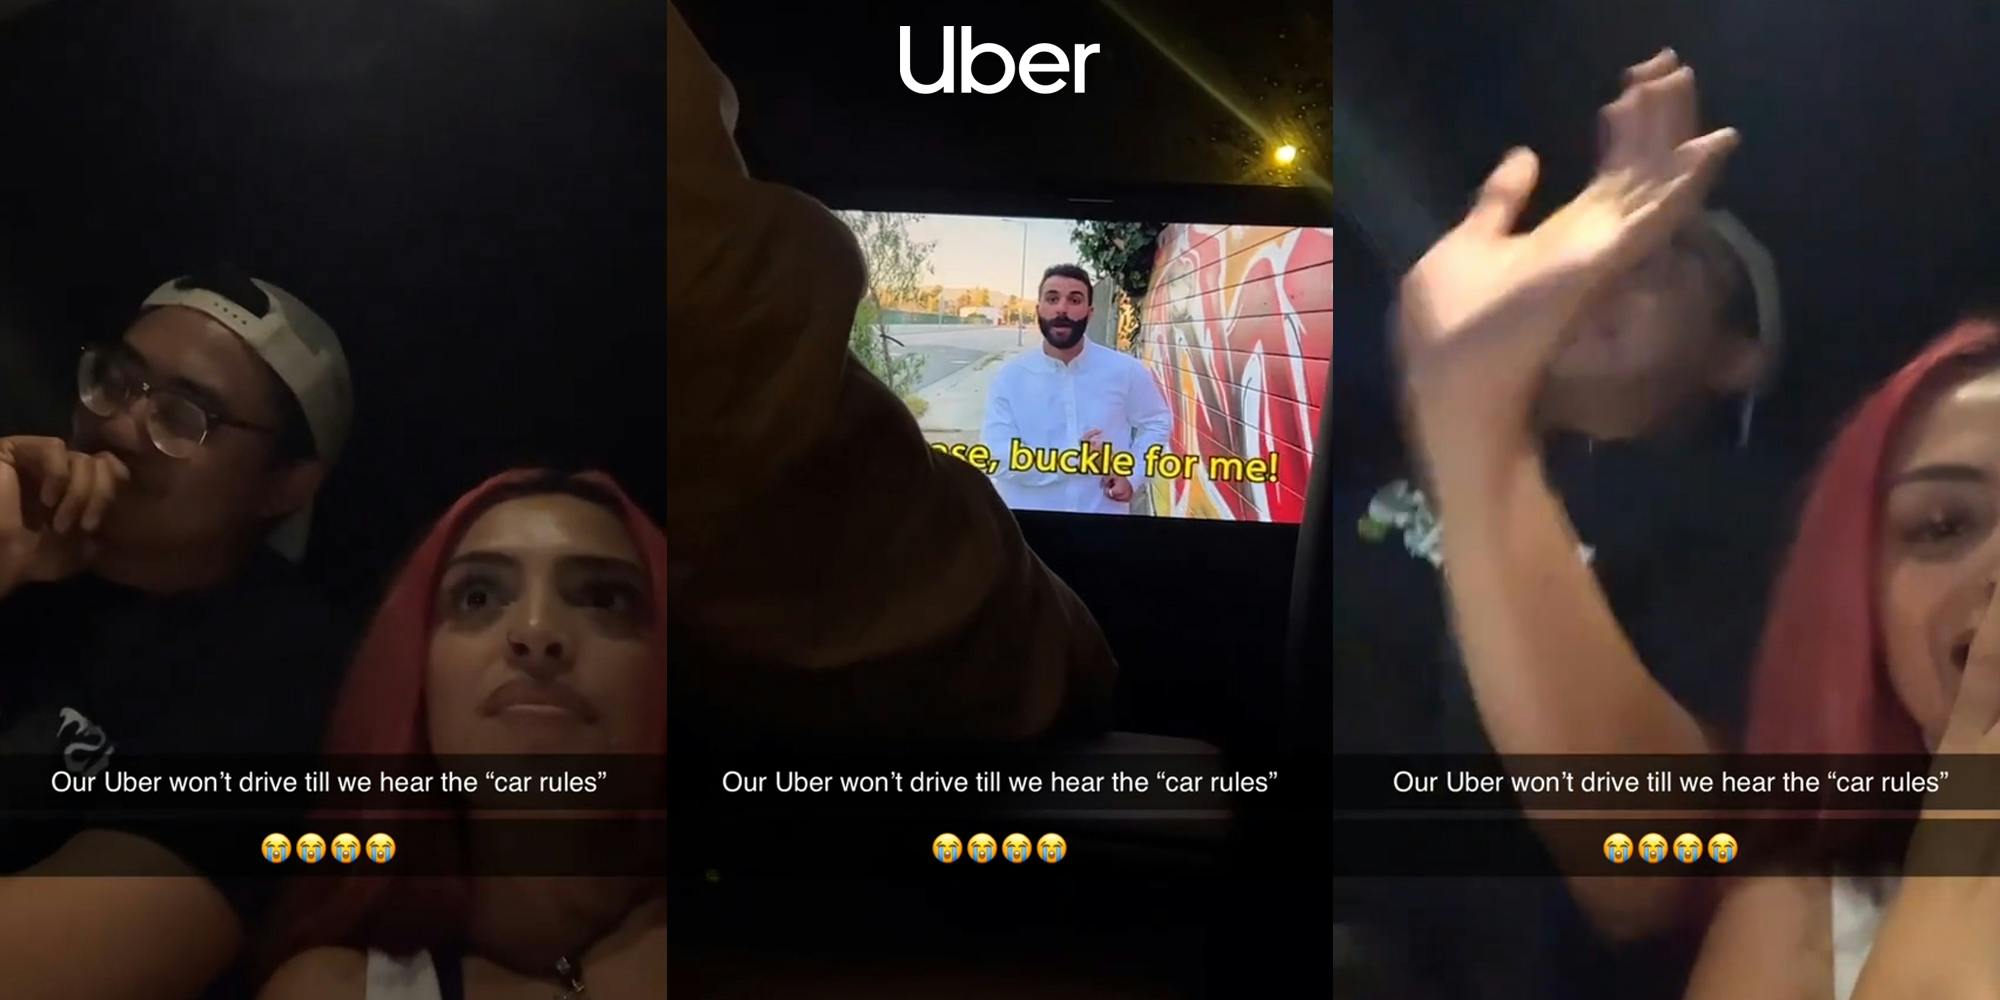 Uber passengers in car with caption "Our Uber won't drive till we hear the "car rules" (l) Uber driver with presentation on screen in car with caption "Our Uber won't drive till we hear the "car rules" with Uber logo at the top (c) Uber passengers in car with caption "Our Uber won't drive till we hear the "car rules" (r)